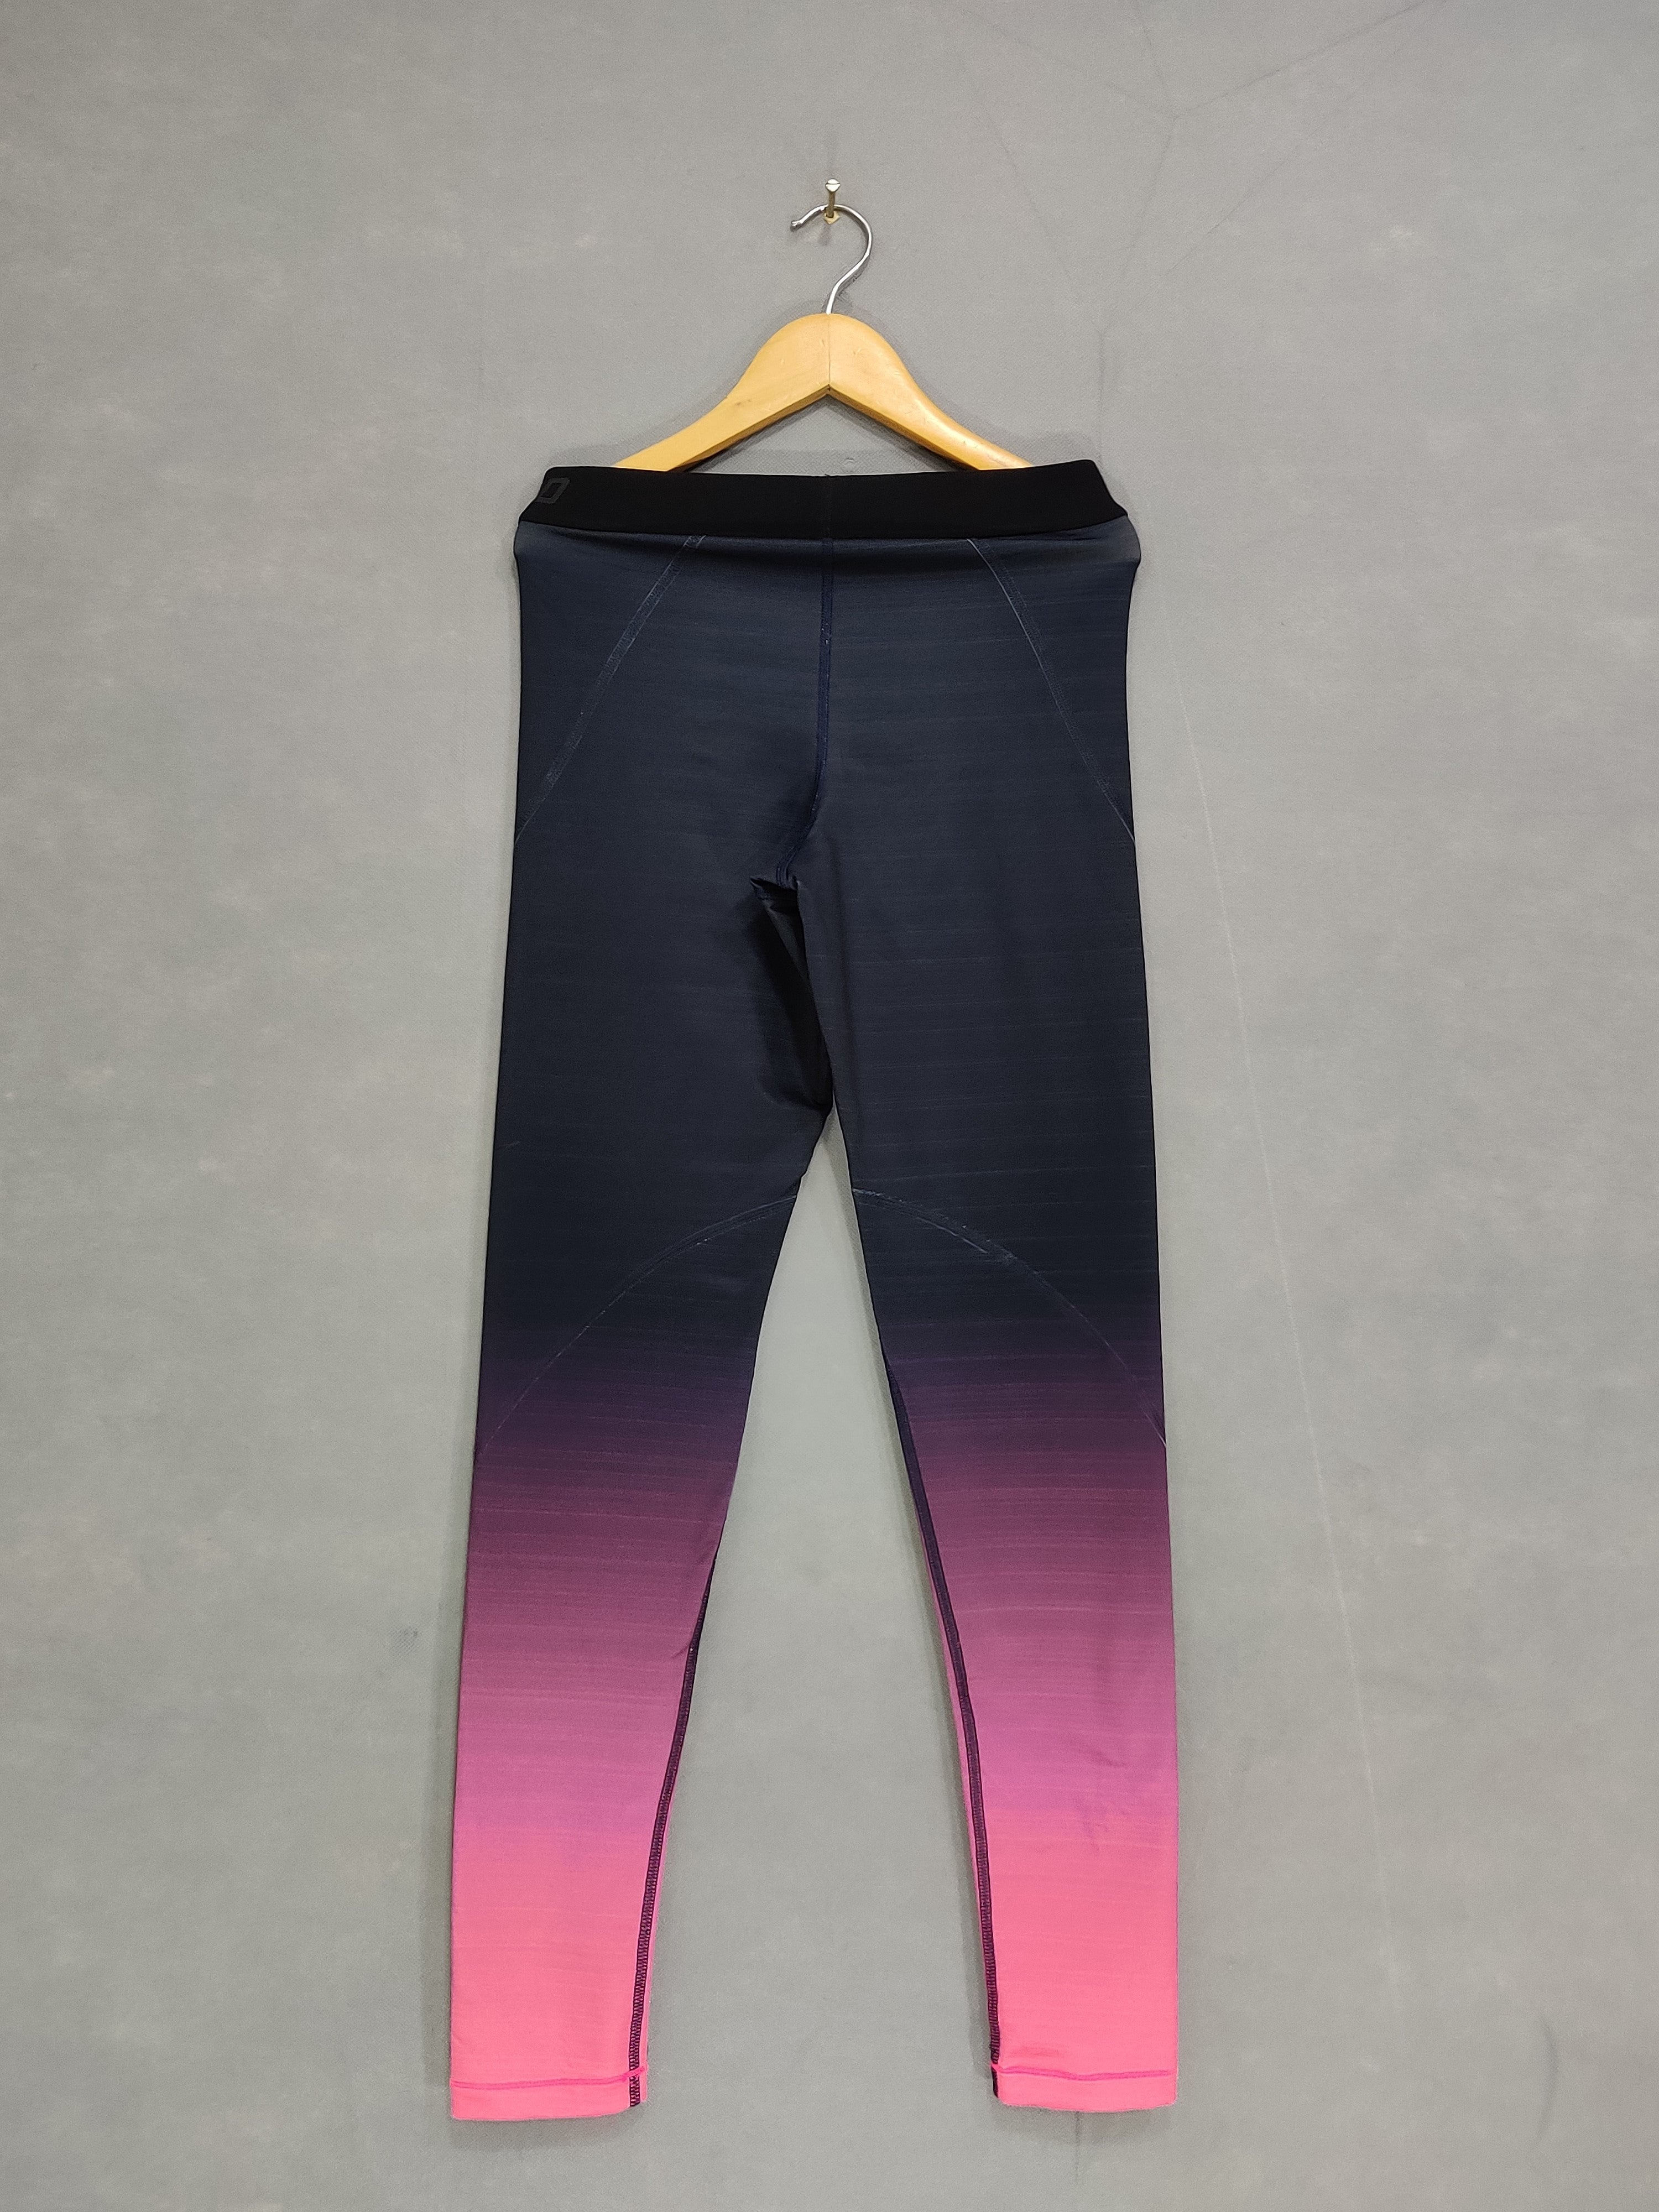 Nike Pro Branded Original Sports Stretch Gym tights For Women